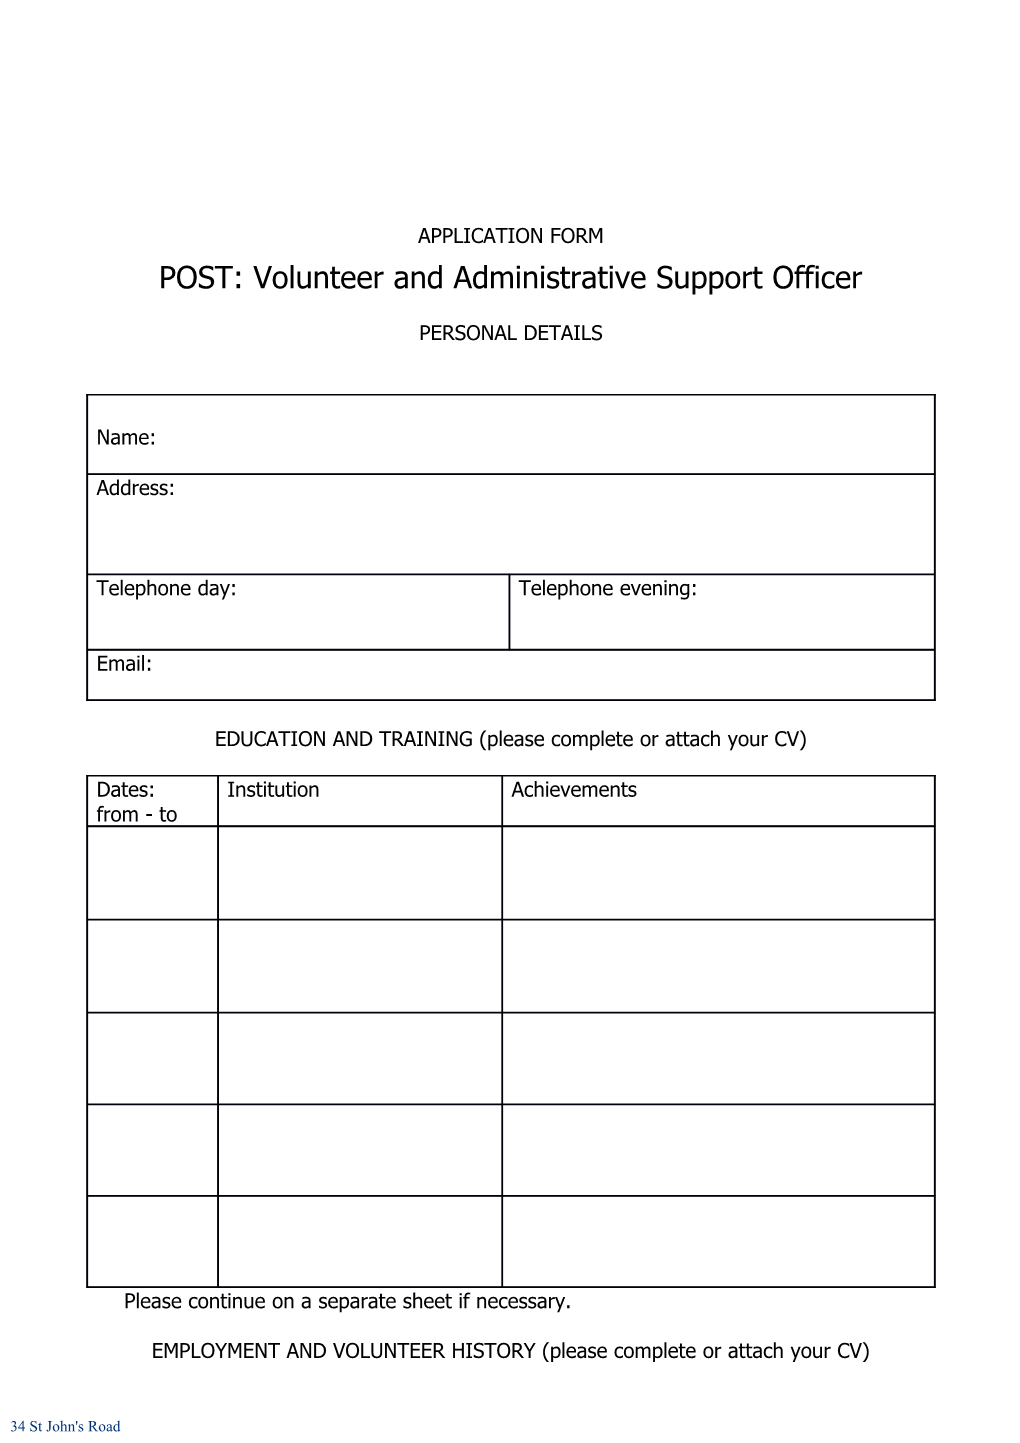 POST: Volunteer and Administrative Support Officer